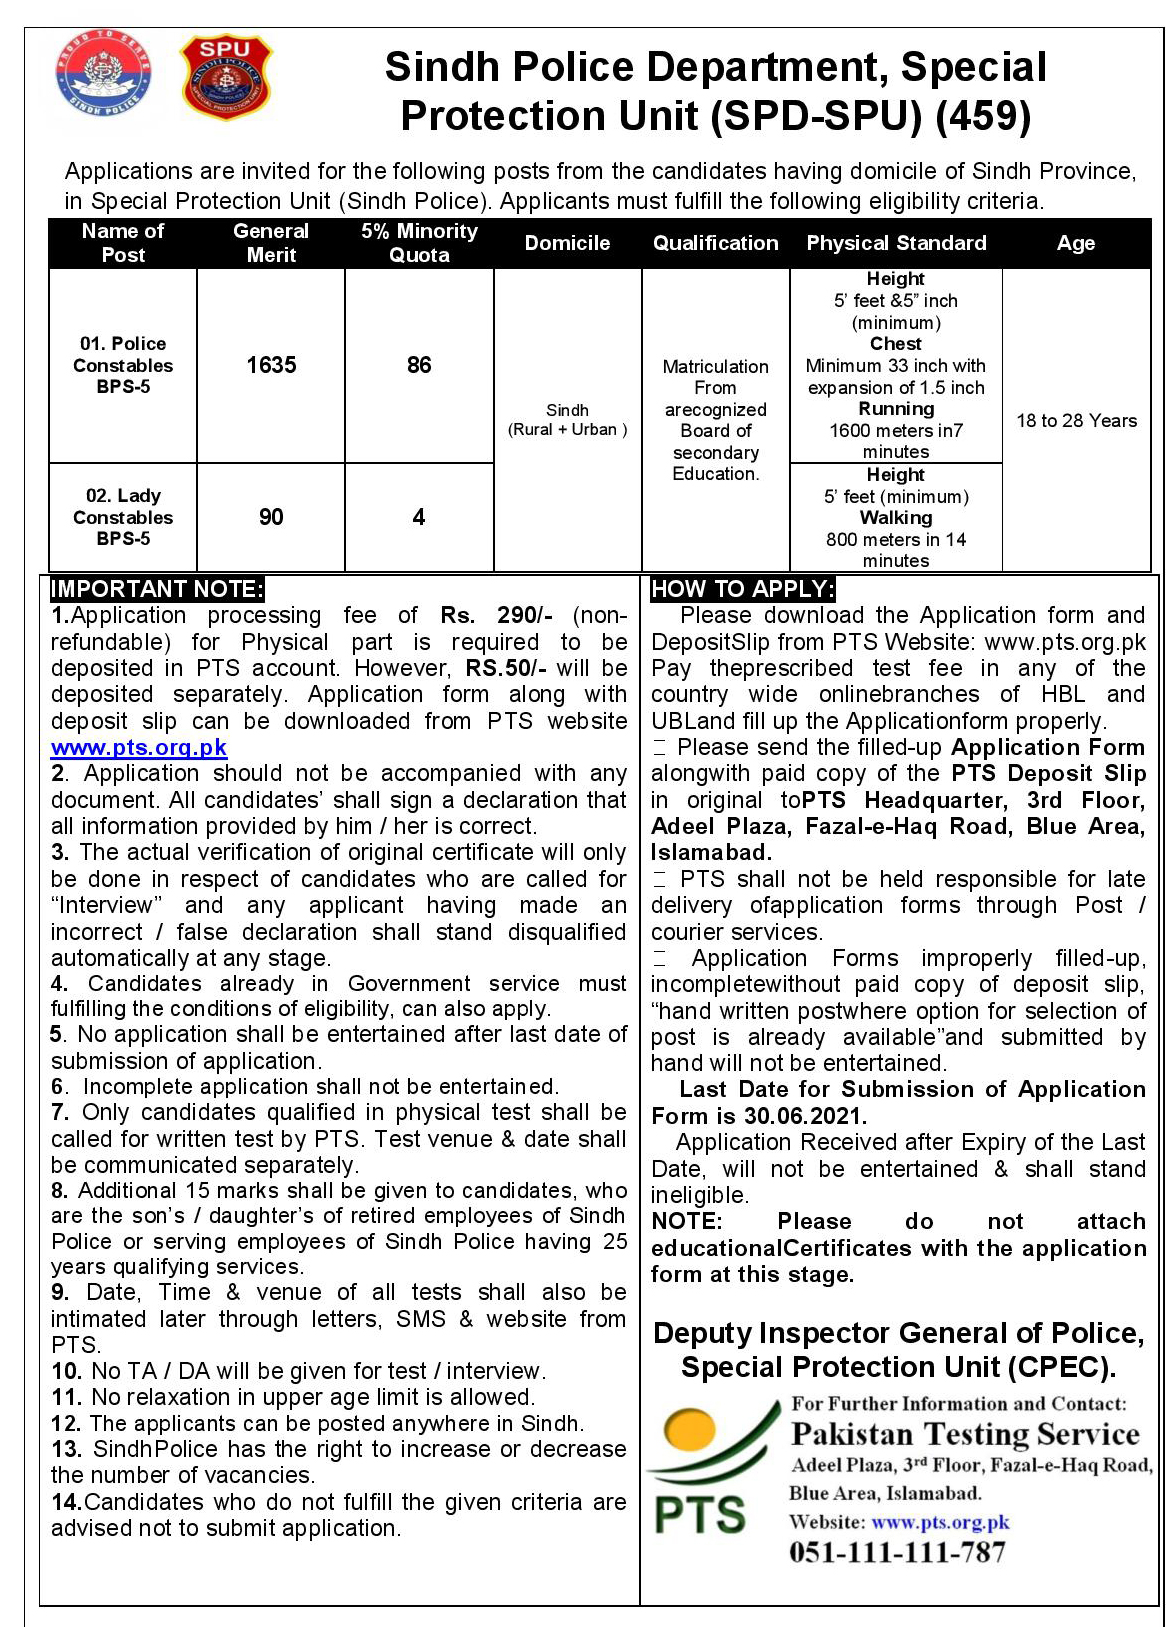 Jobs In SPU Police 2021 II Special Protection Unit SPU for Constables Jobs 2021